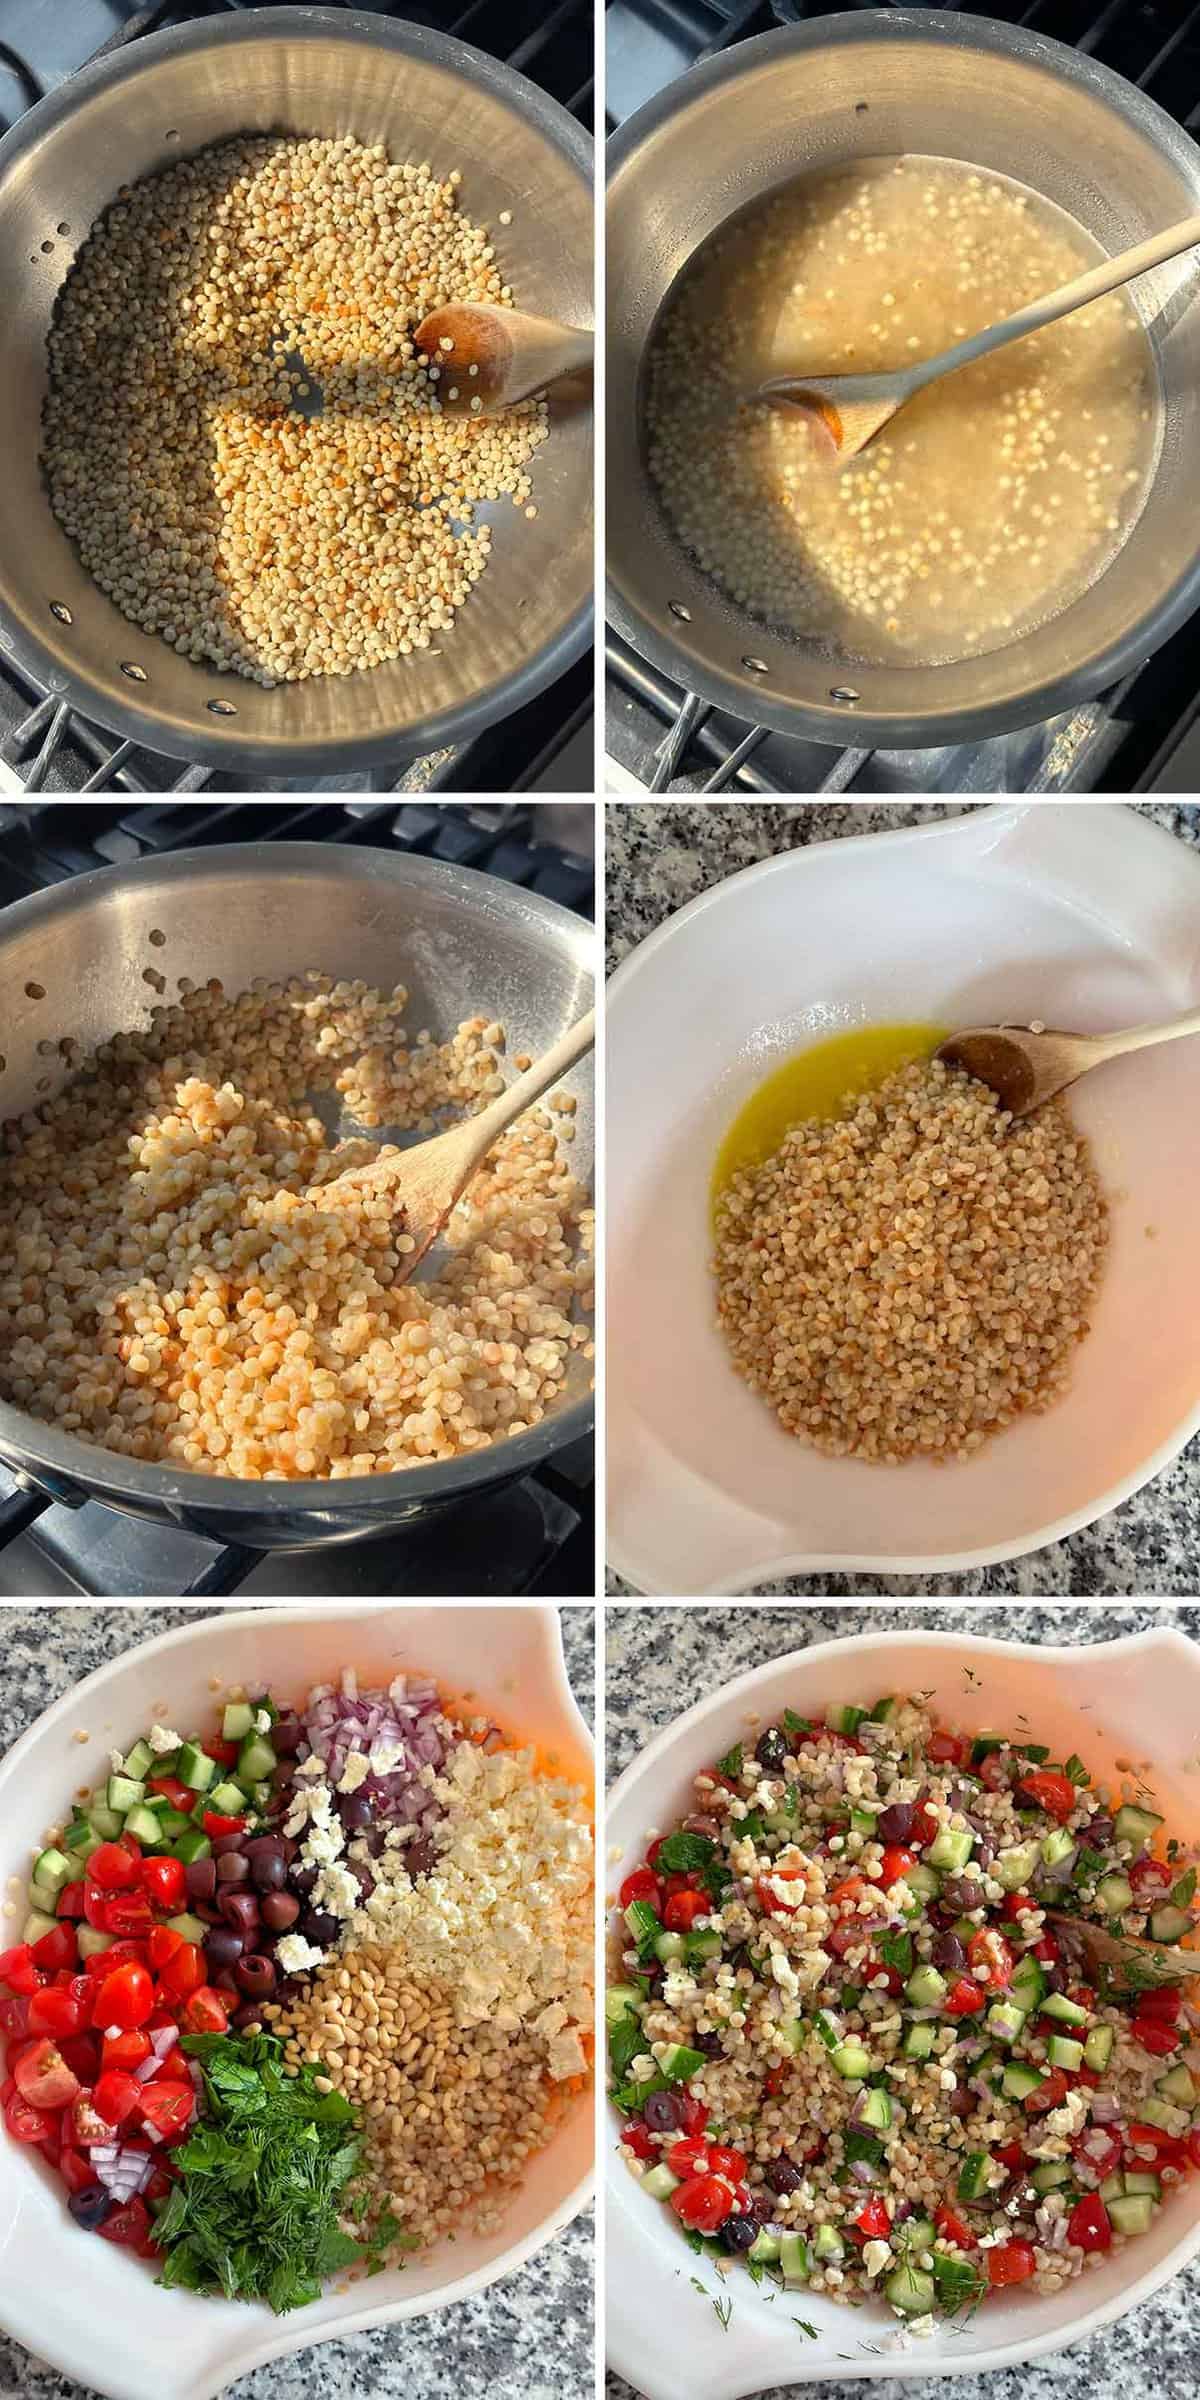 Process collage showing how to toast and cook Israeli couscous, and mix it into a Mediterranean couscous salad.